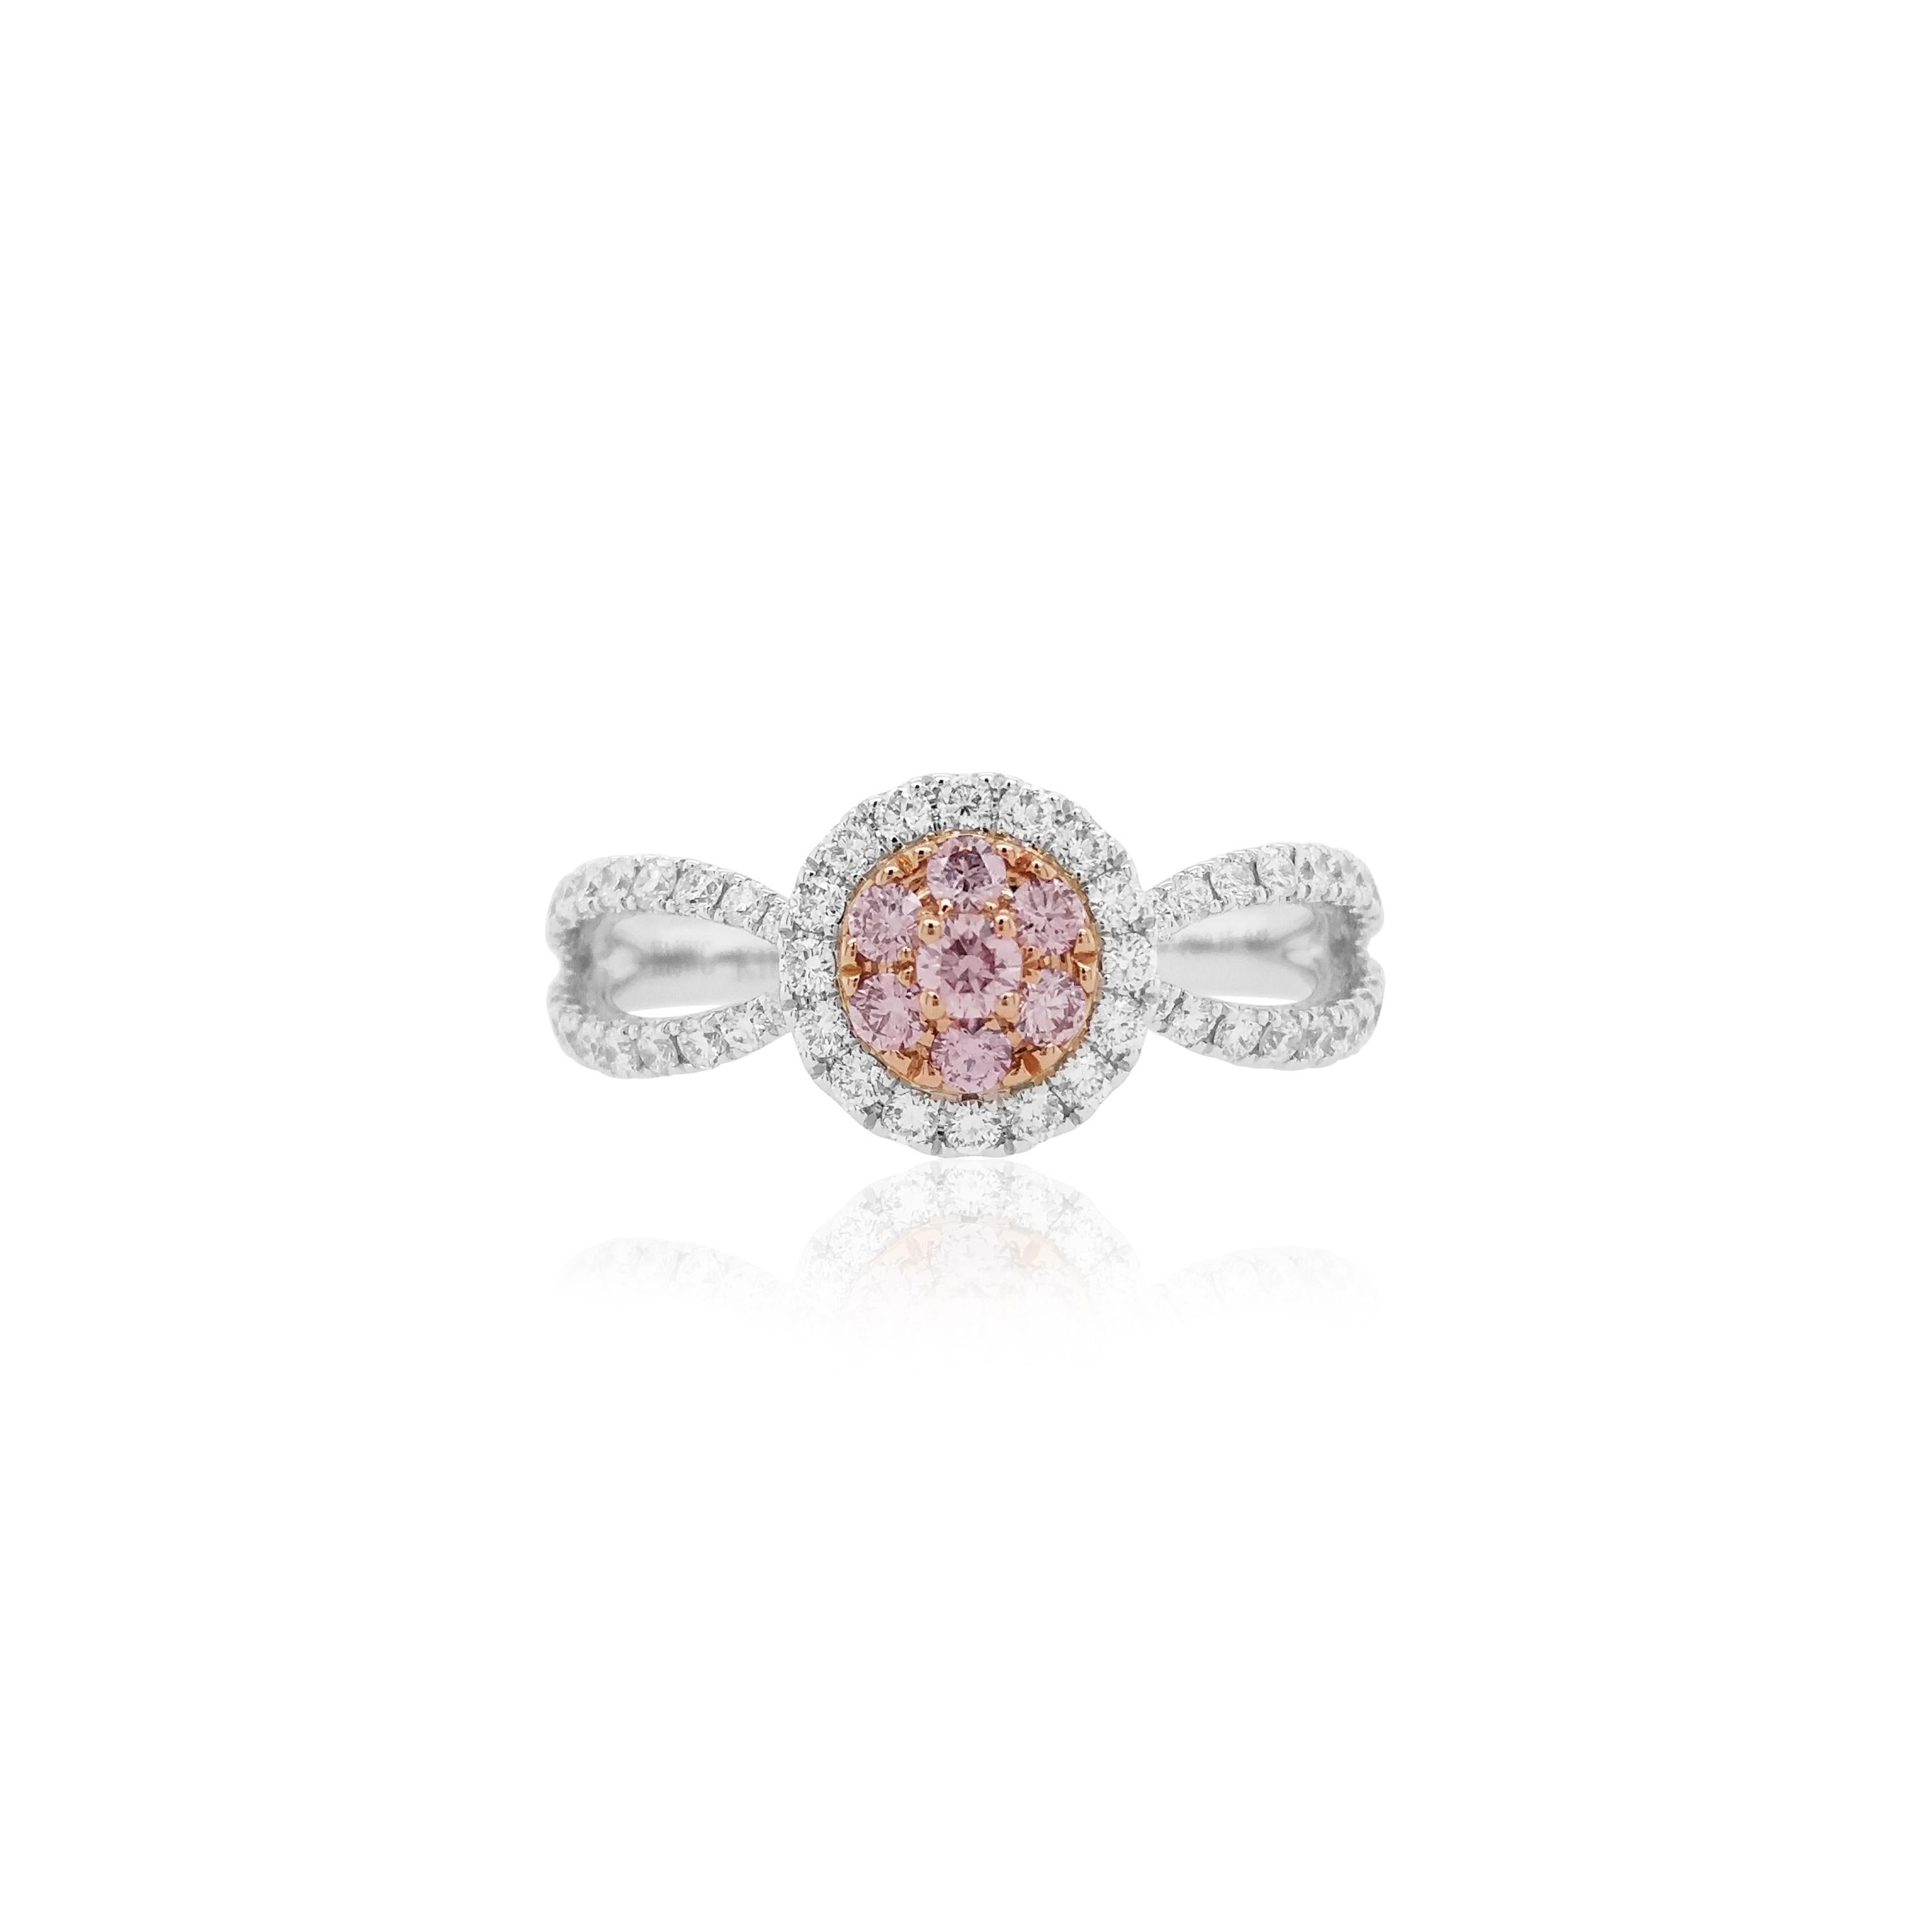 Beautiful designer Ring made with pink diamonds and white diamonds, radiating charm and magnificence.

Natural Pink Diamond - 0.15 cts
White diamond - 0.42 cts
18K Gold

HYT Jewelry is a privately owned company headquartered in Hong Kong, with